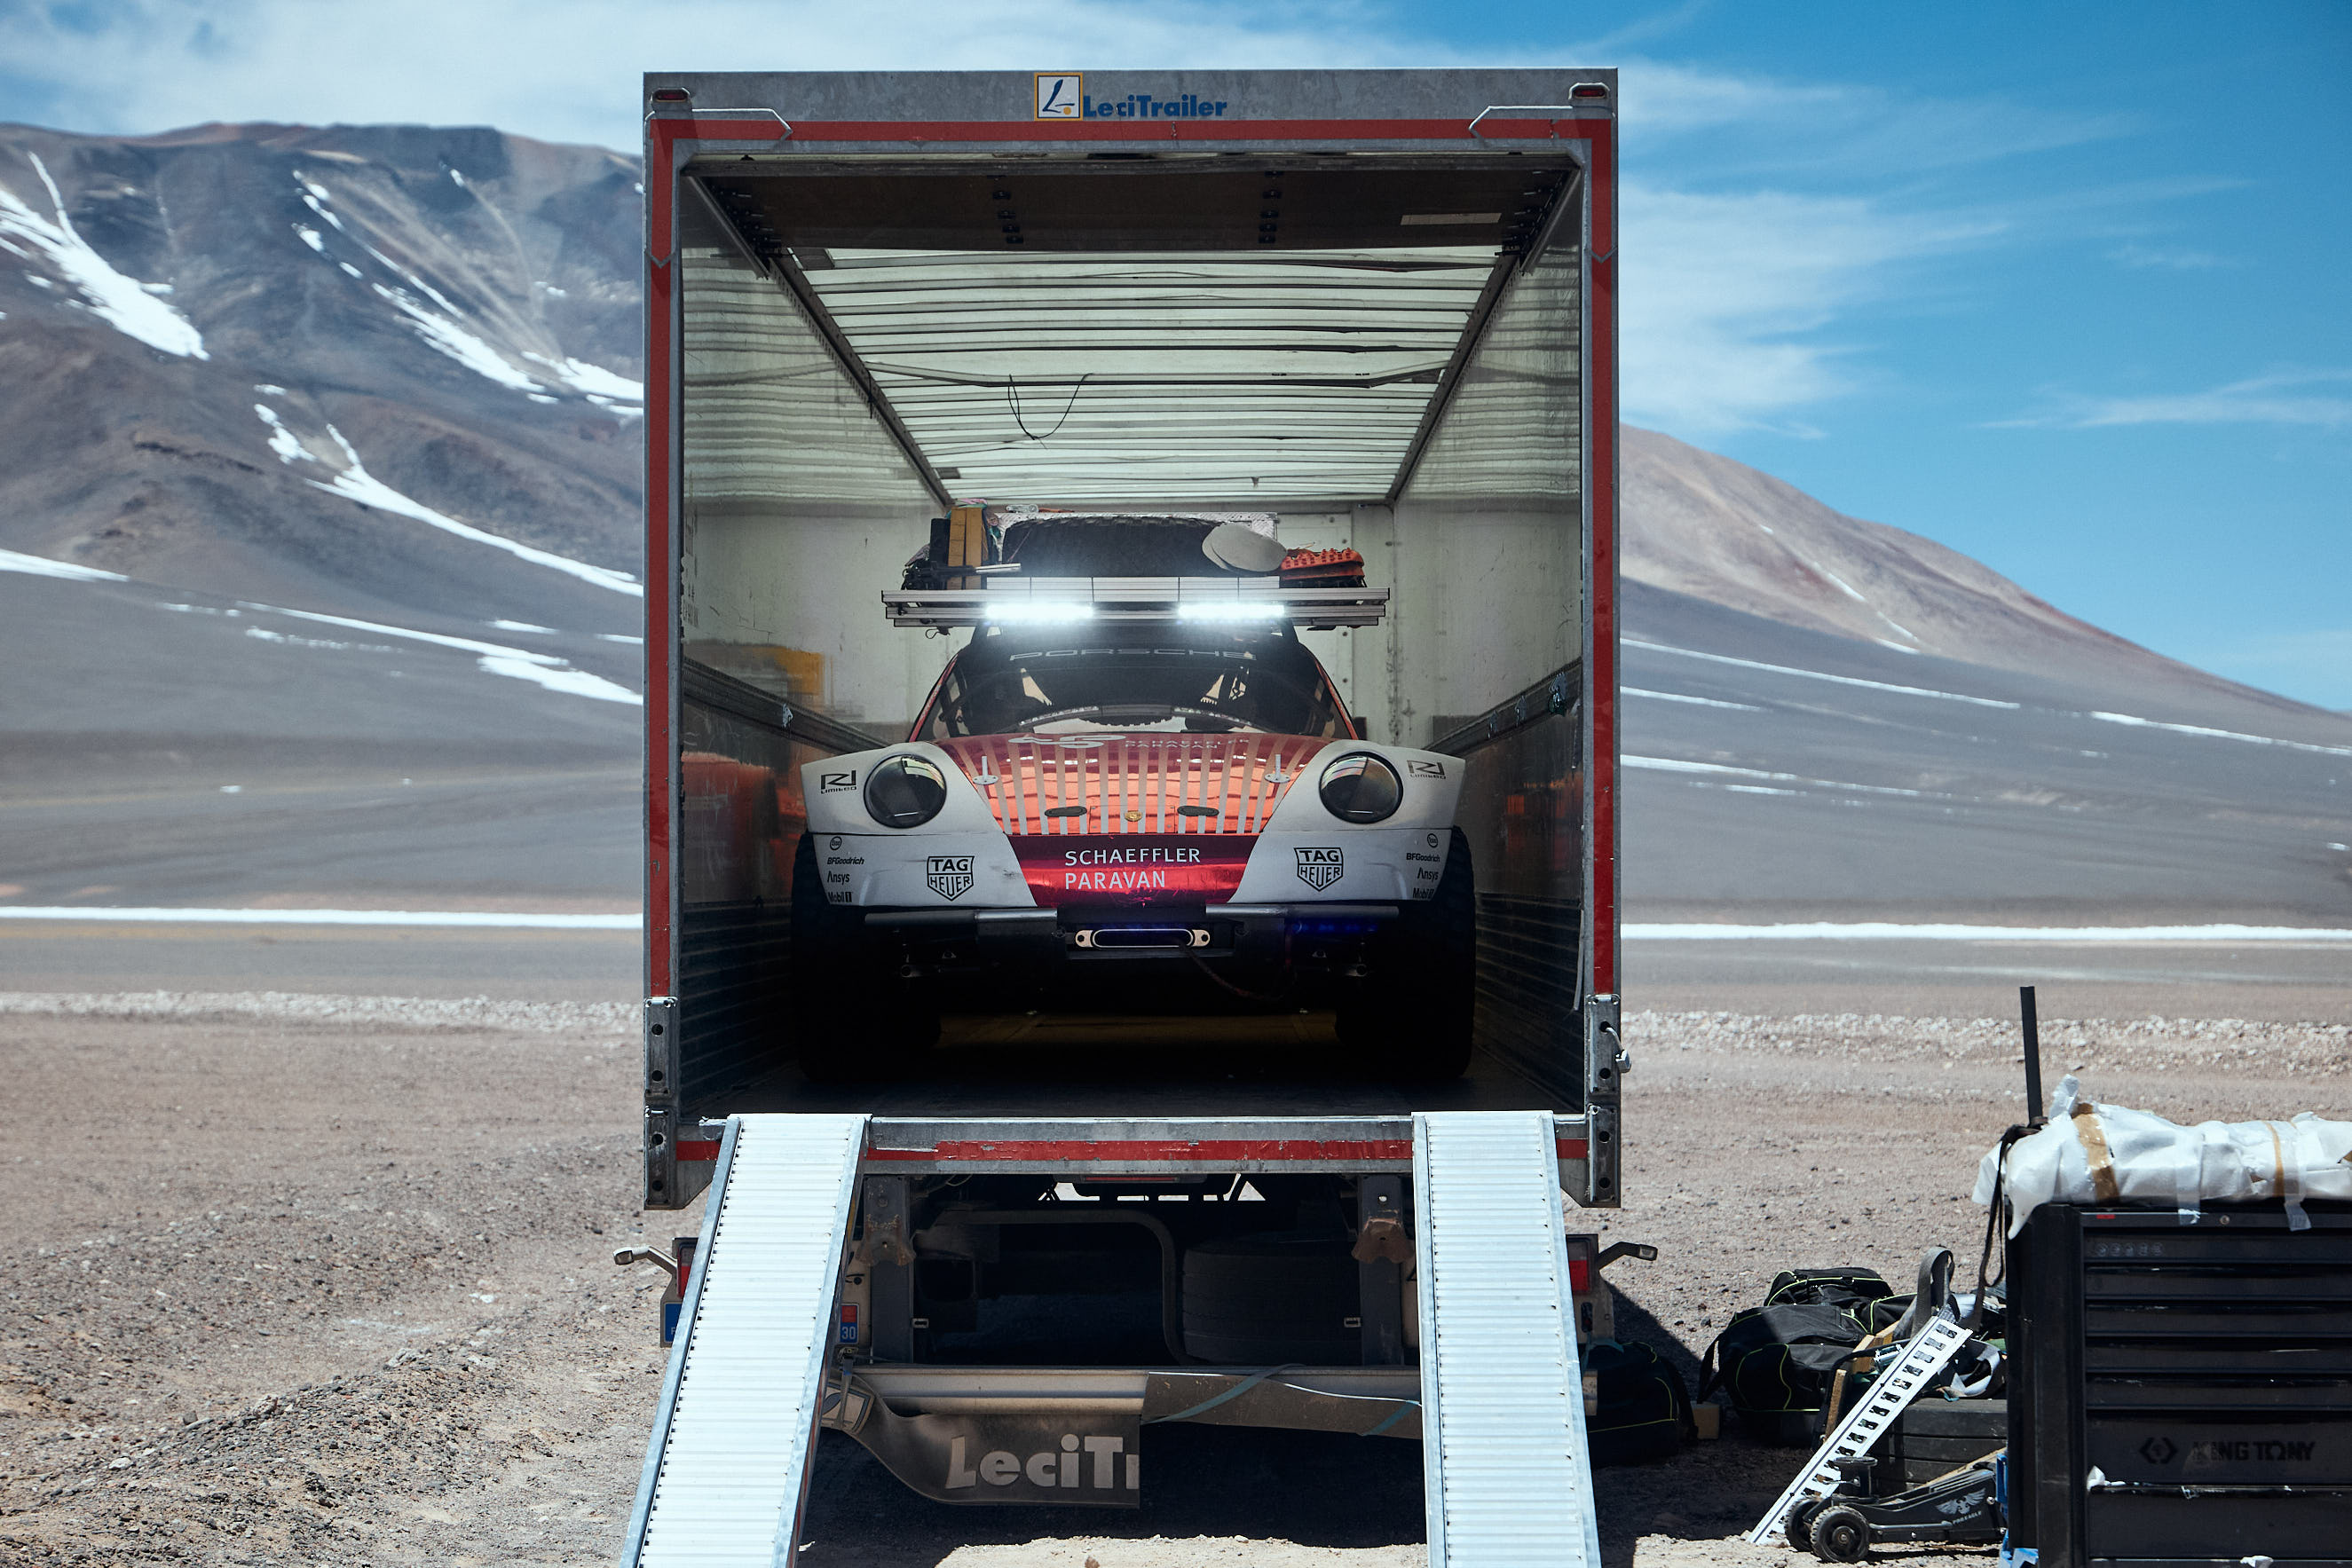 Off-road Porsche 911 facing out of truck, volcano in background